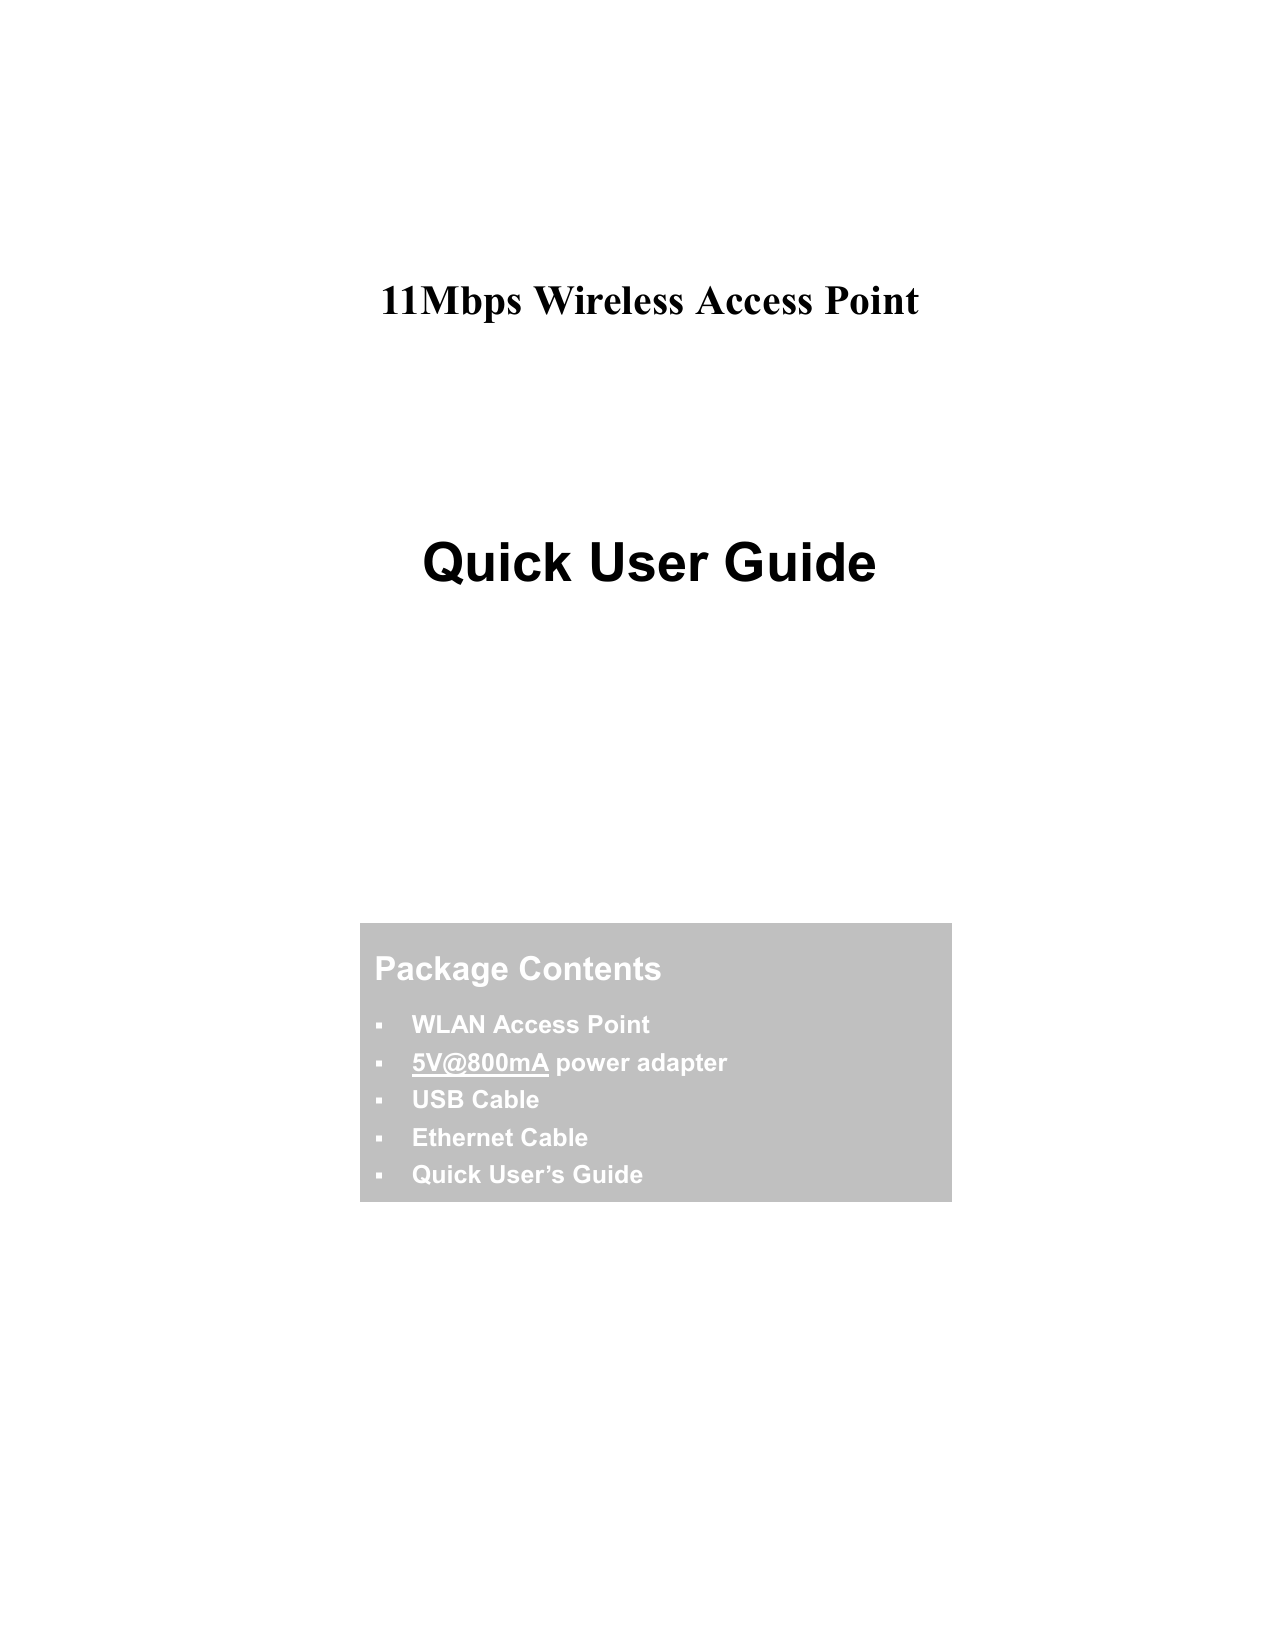     11Mbps Wireless Access Point      Quick User Guide       Package Contents  WLAN Access Point  5V@800mA power adapter  USB Cable  Ethernet Cable  Quick User’s Guide 